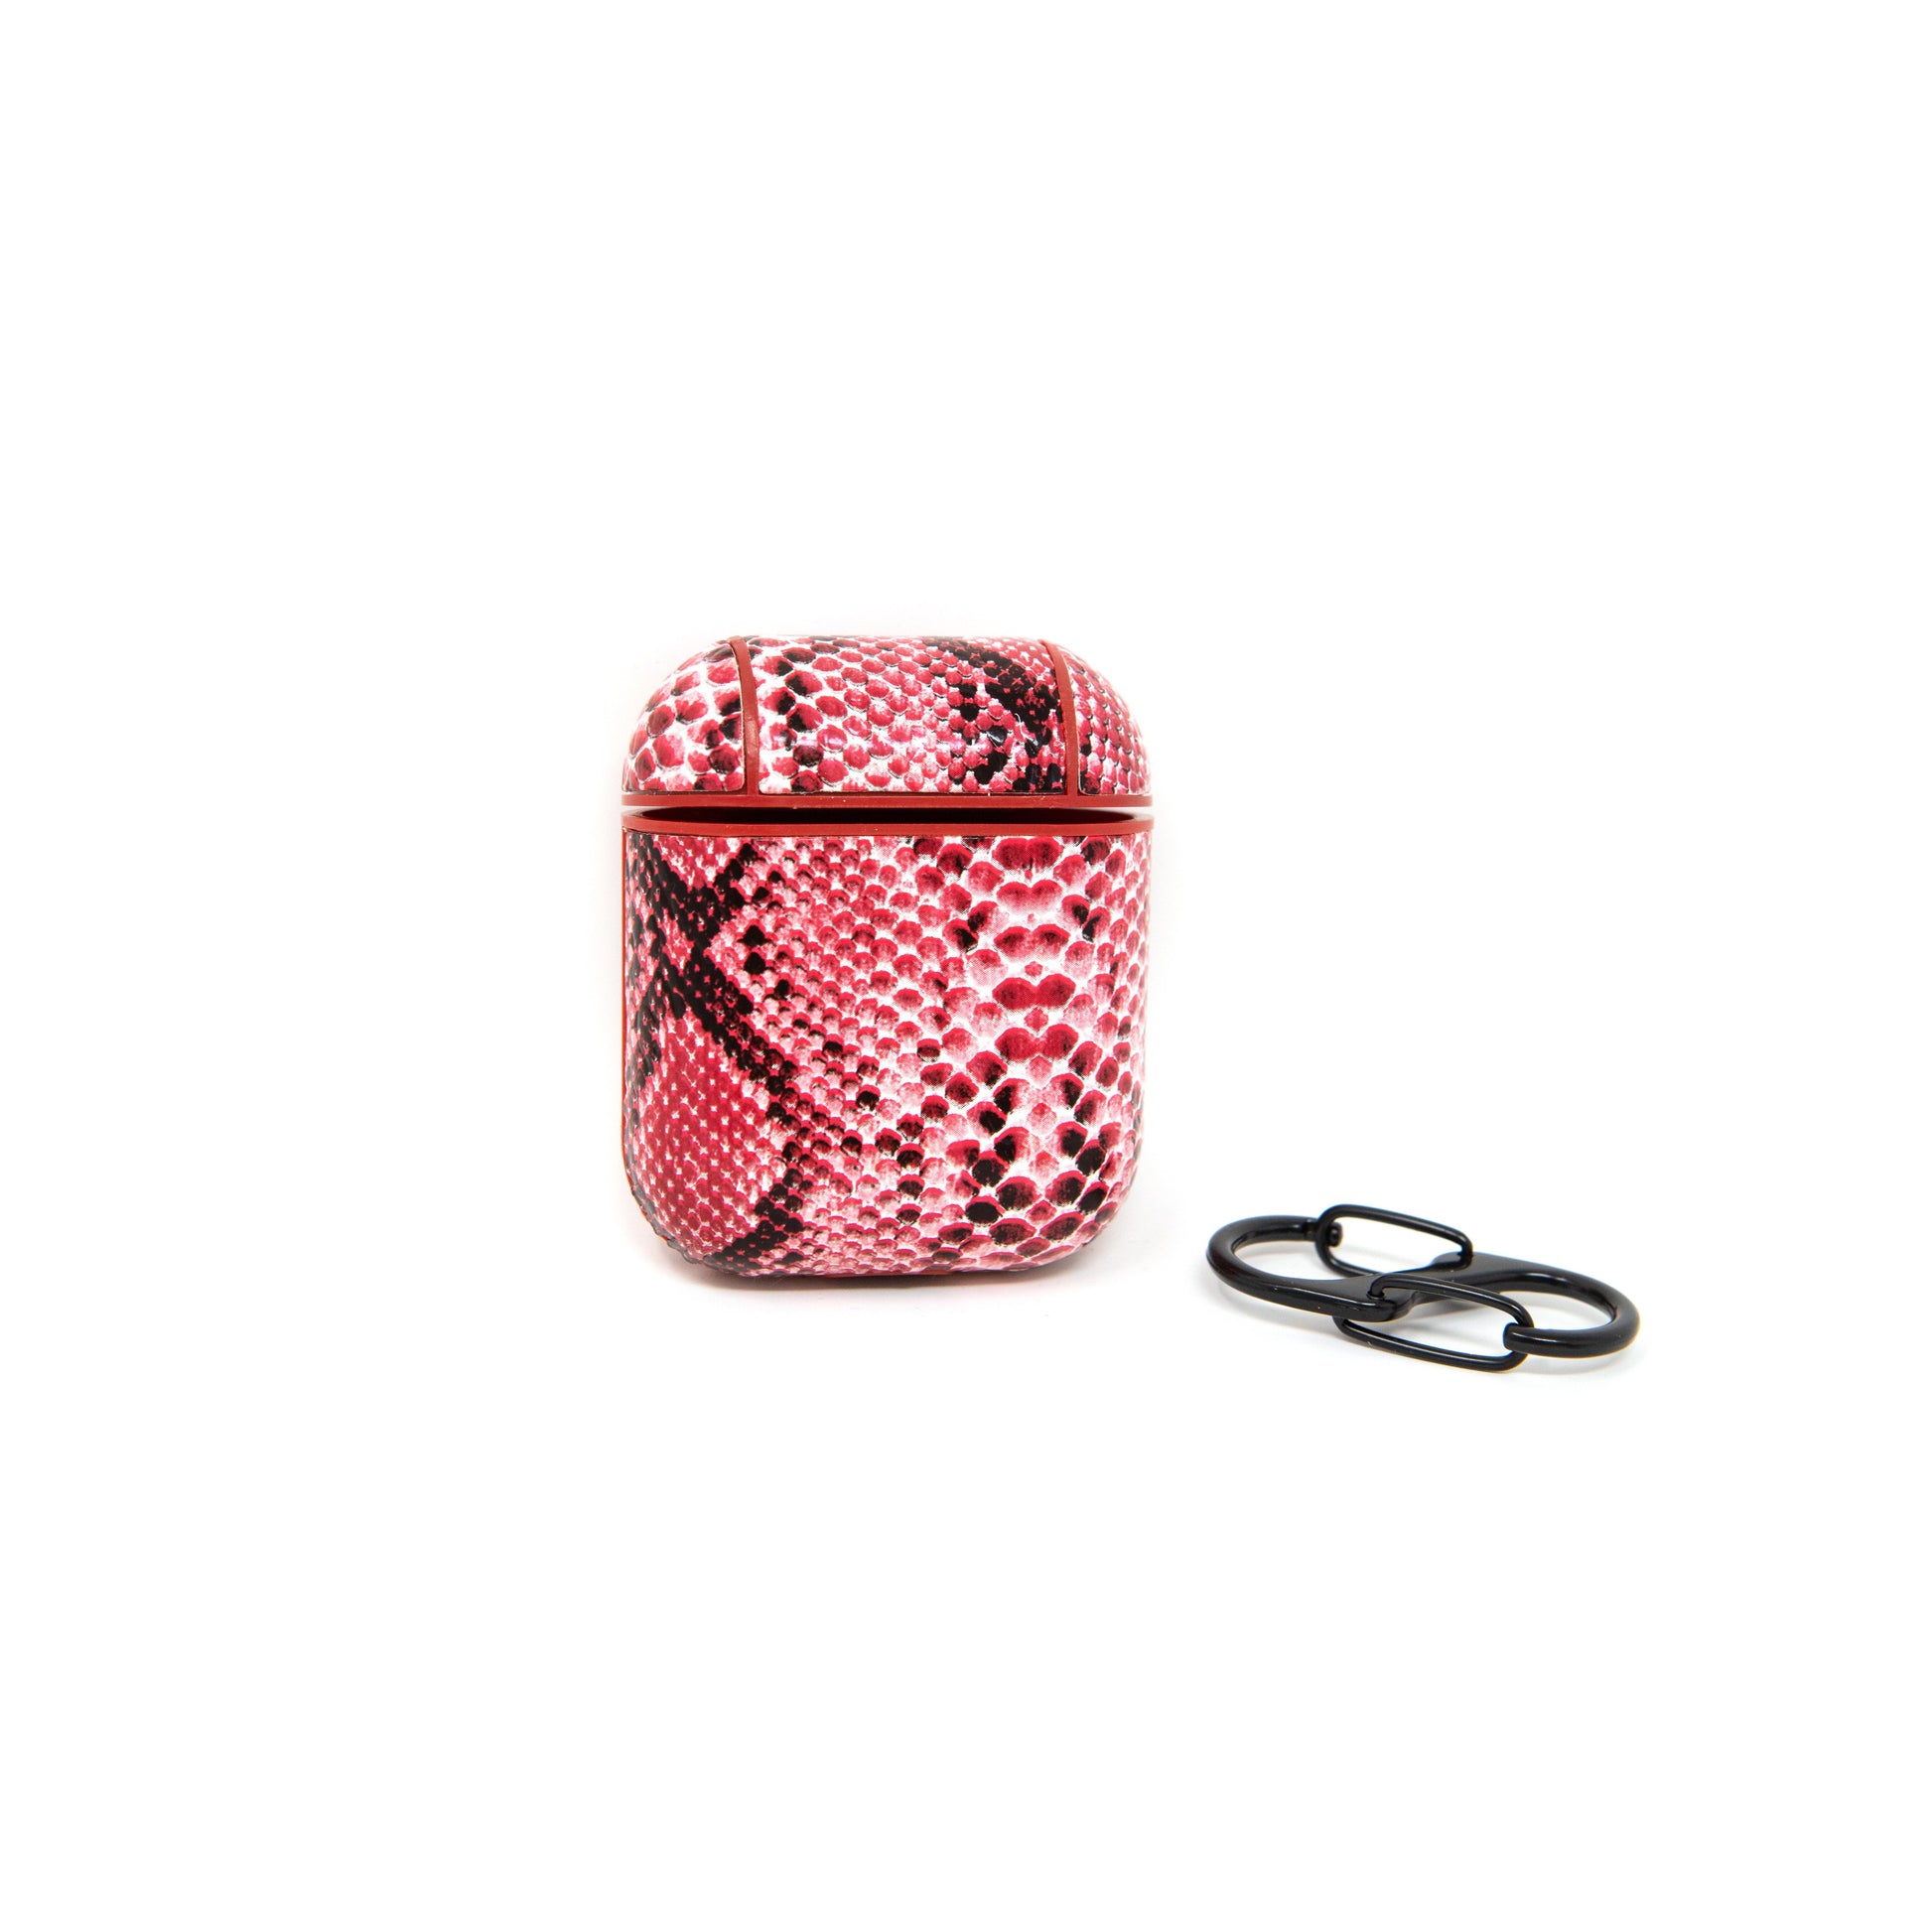 Snakeskin AirPod Cases ACCESSORY The Sis Kiss Pink